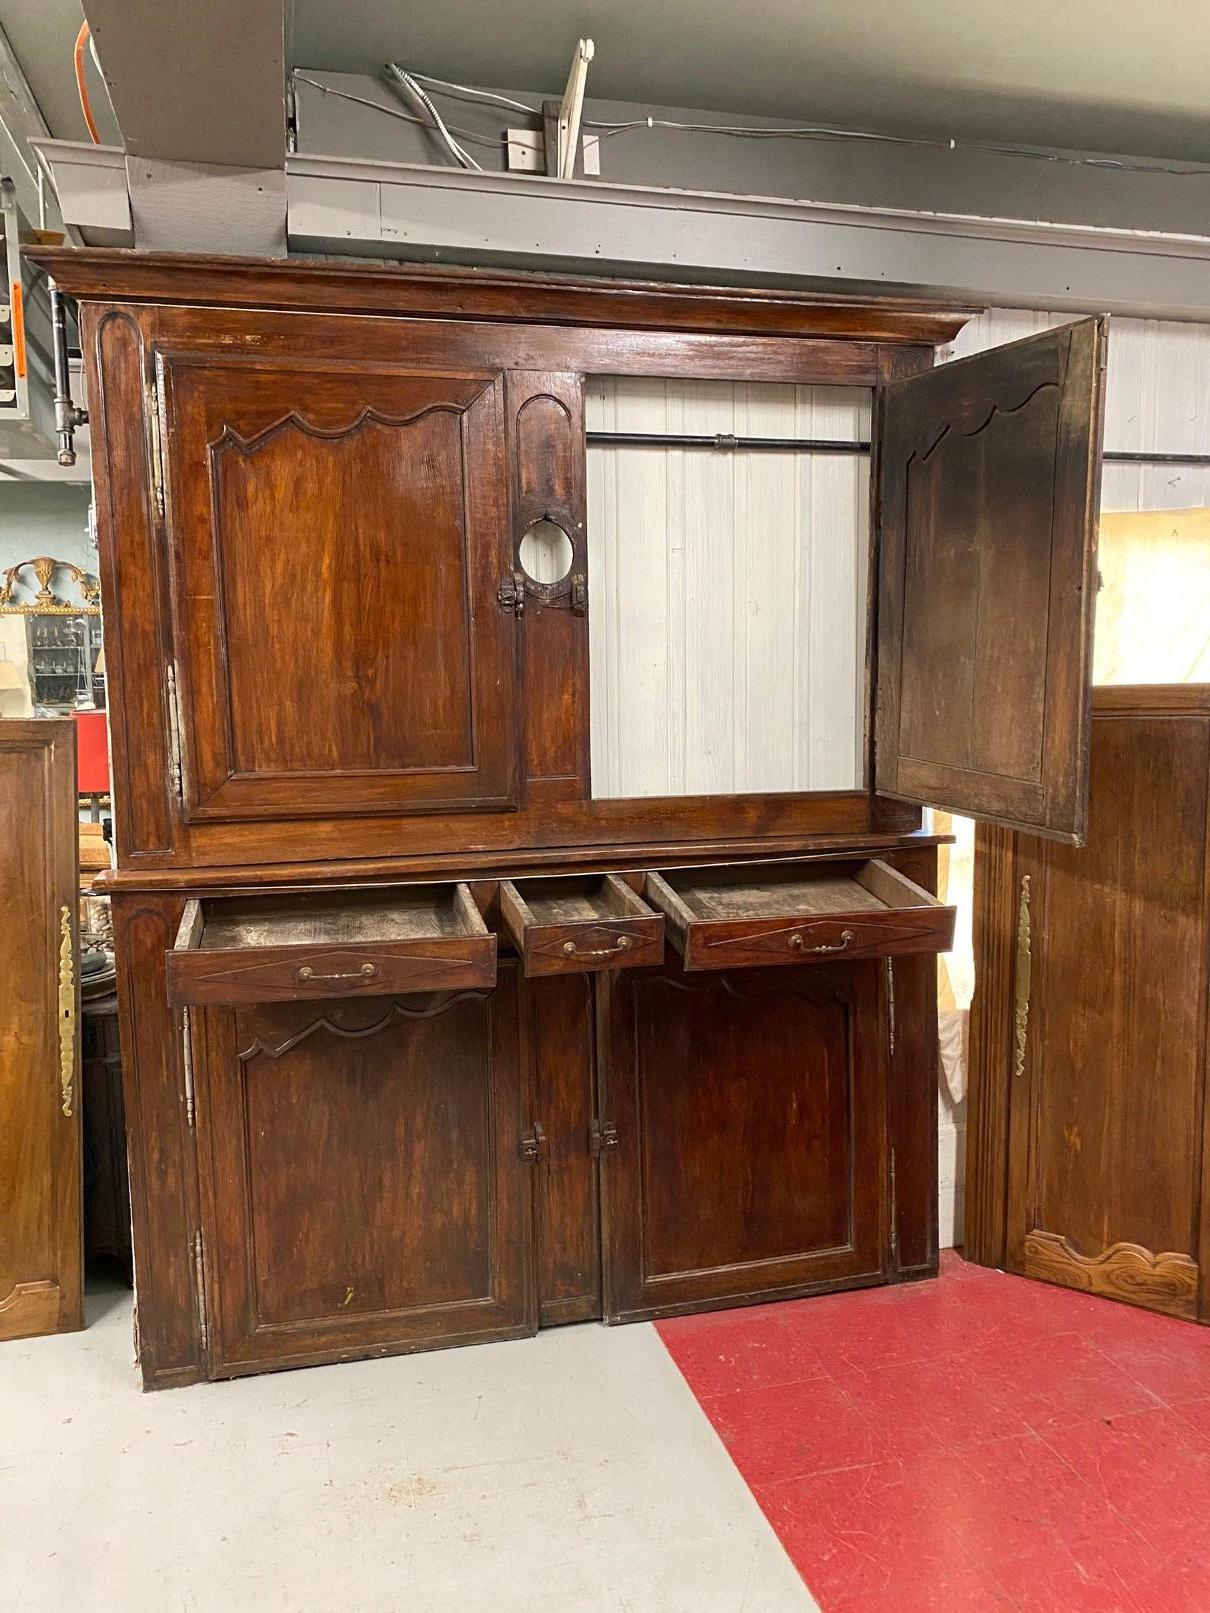 The antique Provincial Louis XV period boiserie en chen paneled wall paneling is from a French country chateau. The unit consists of a pair of large doors above 3 drawers, an opening for a fireplace or stove, and 2 doors below. The drawers are